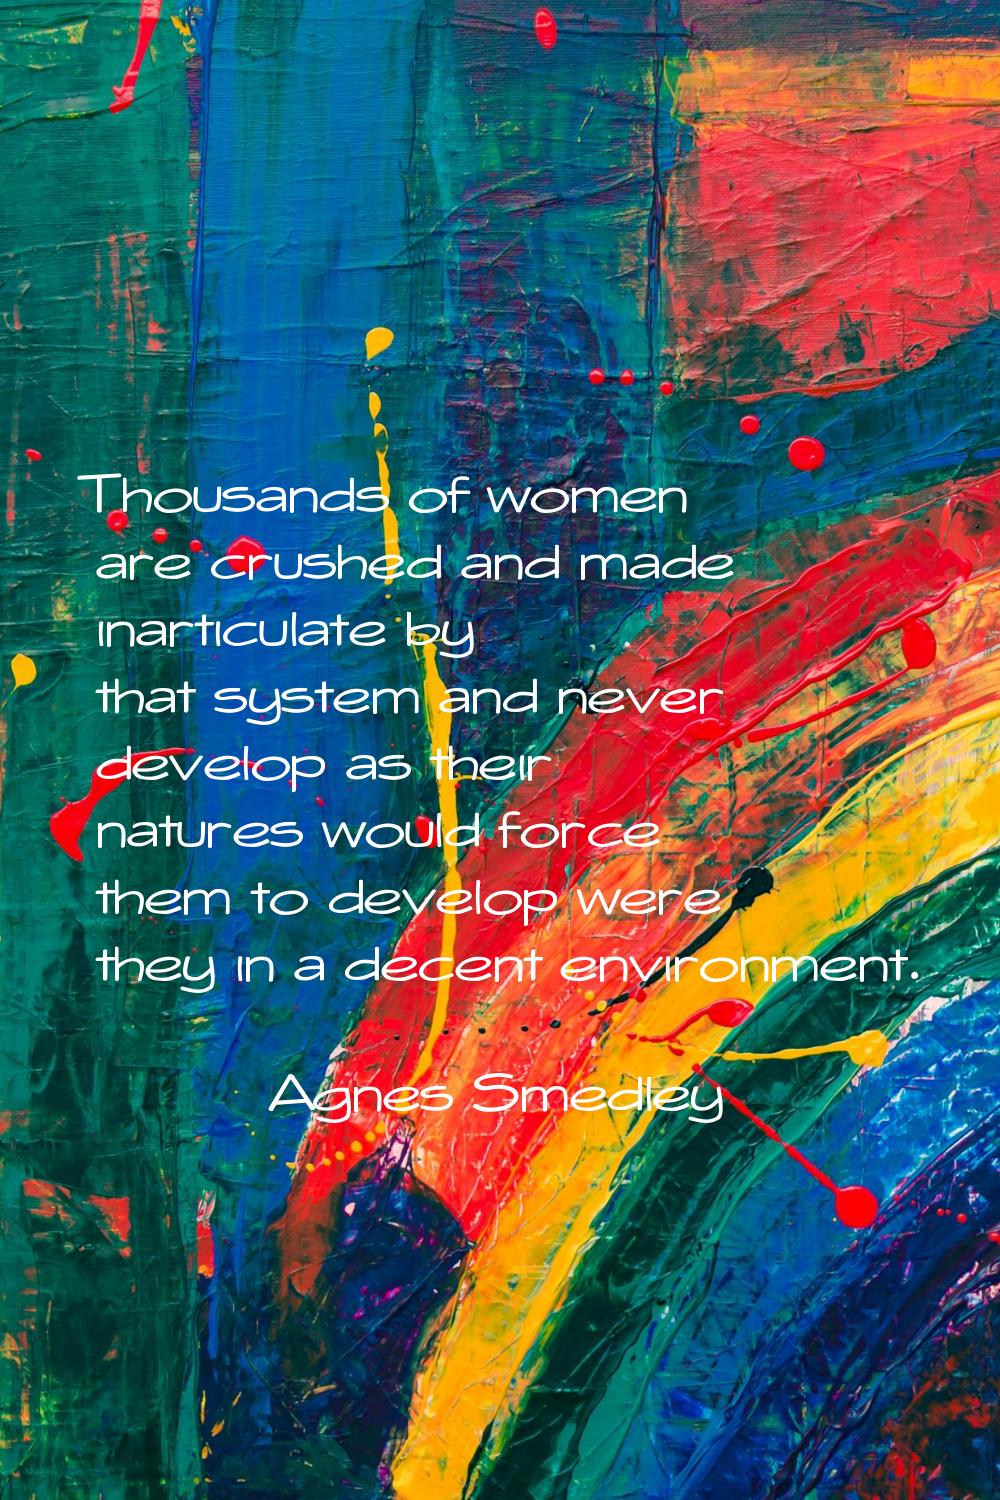 Thousands of women are crushed and made inarticulate by that system and never develop as their natu